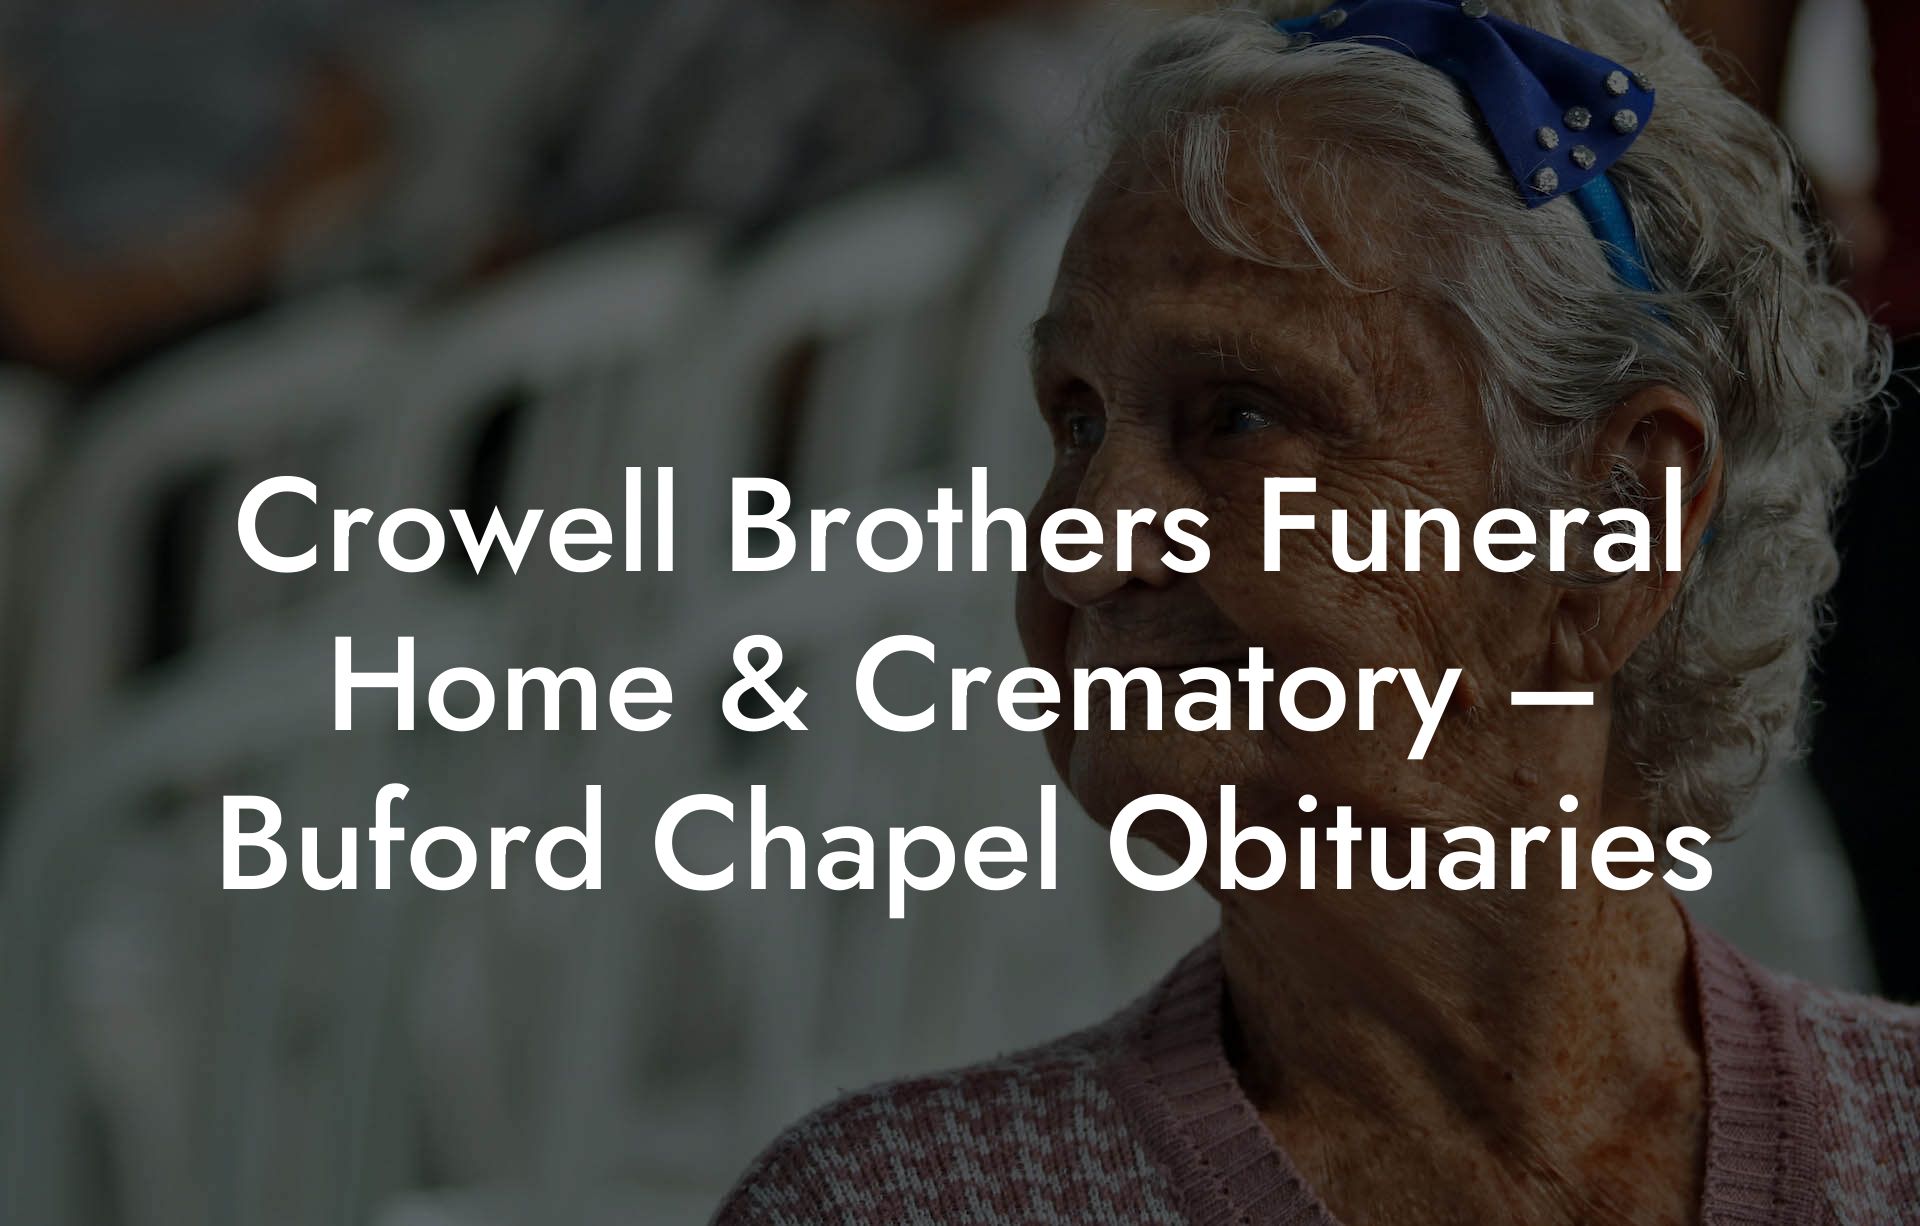 Crowell Brothers Funeral Home & Crematory – Buford Chapel Obituaries